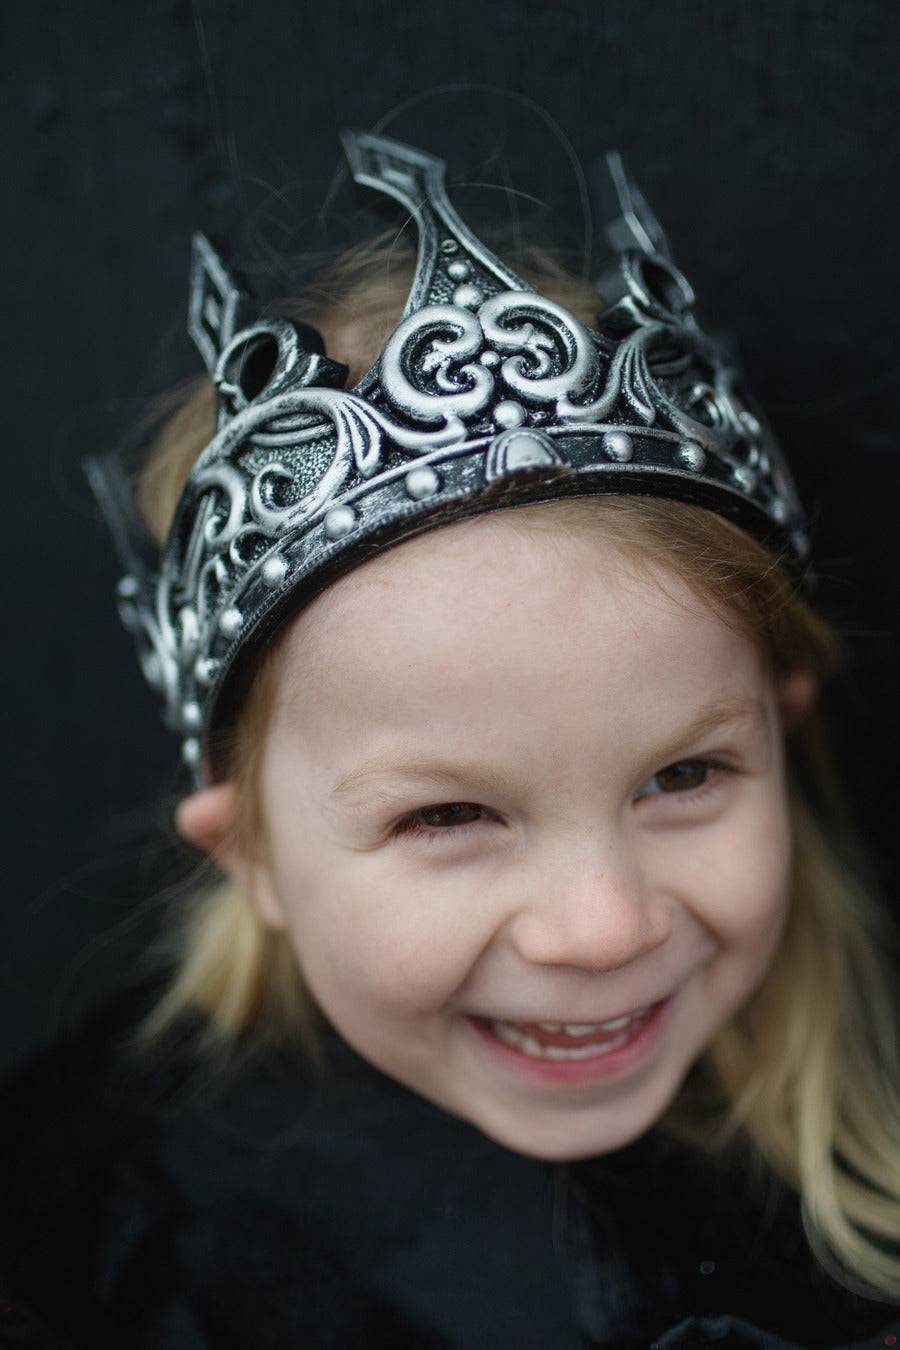 Medieval Crown - A Child's Delight